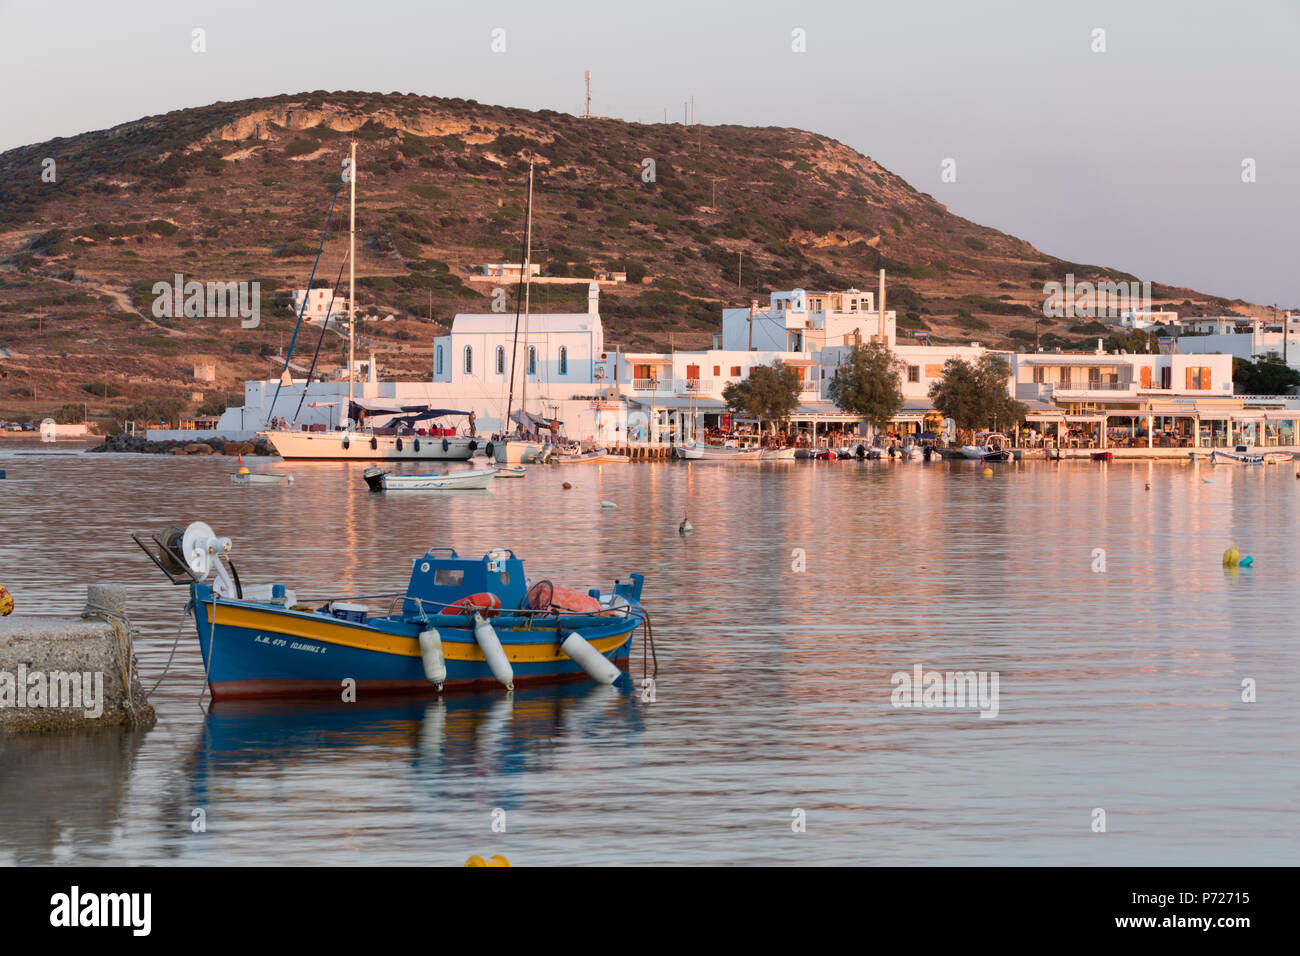 Fishing boat in harbour with town behind, Pollonia, Milos, Cyclades, Aegean Sea, Greek Islands, Greece, Europe Stock Photo